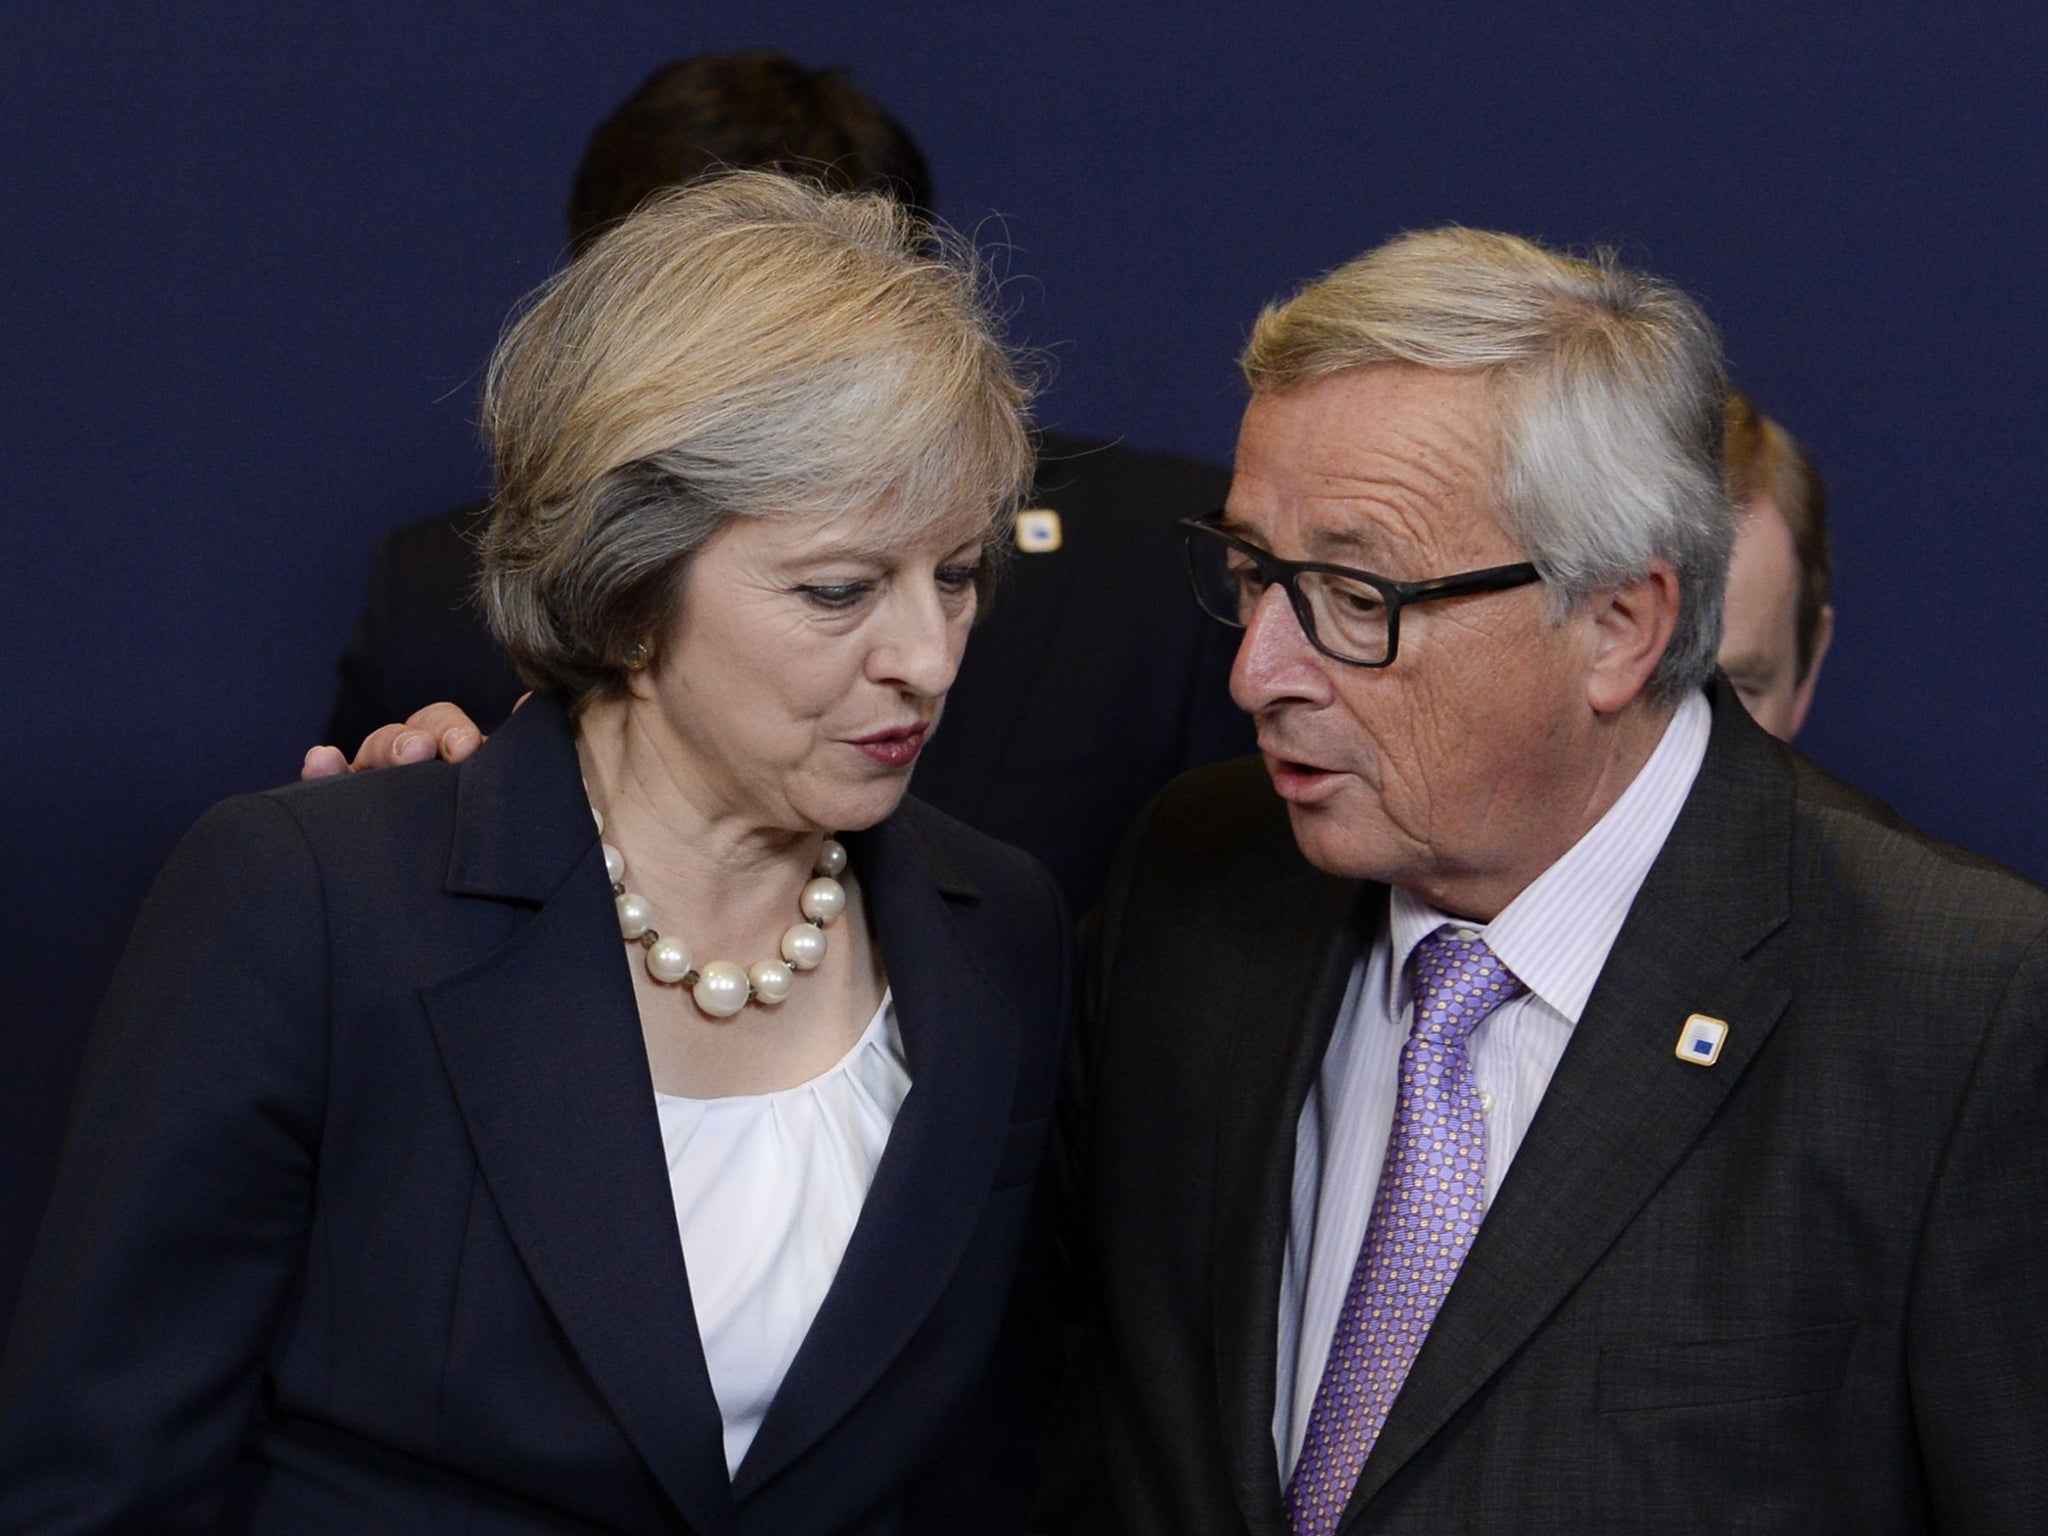 Theresa May with Jean-Claude Juncker at the European Council summit meeting in Brussels